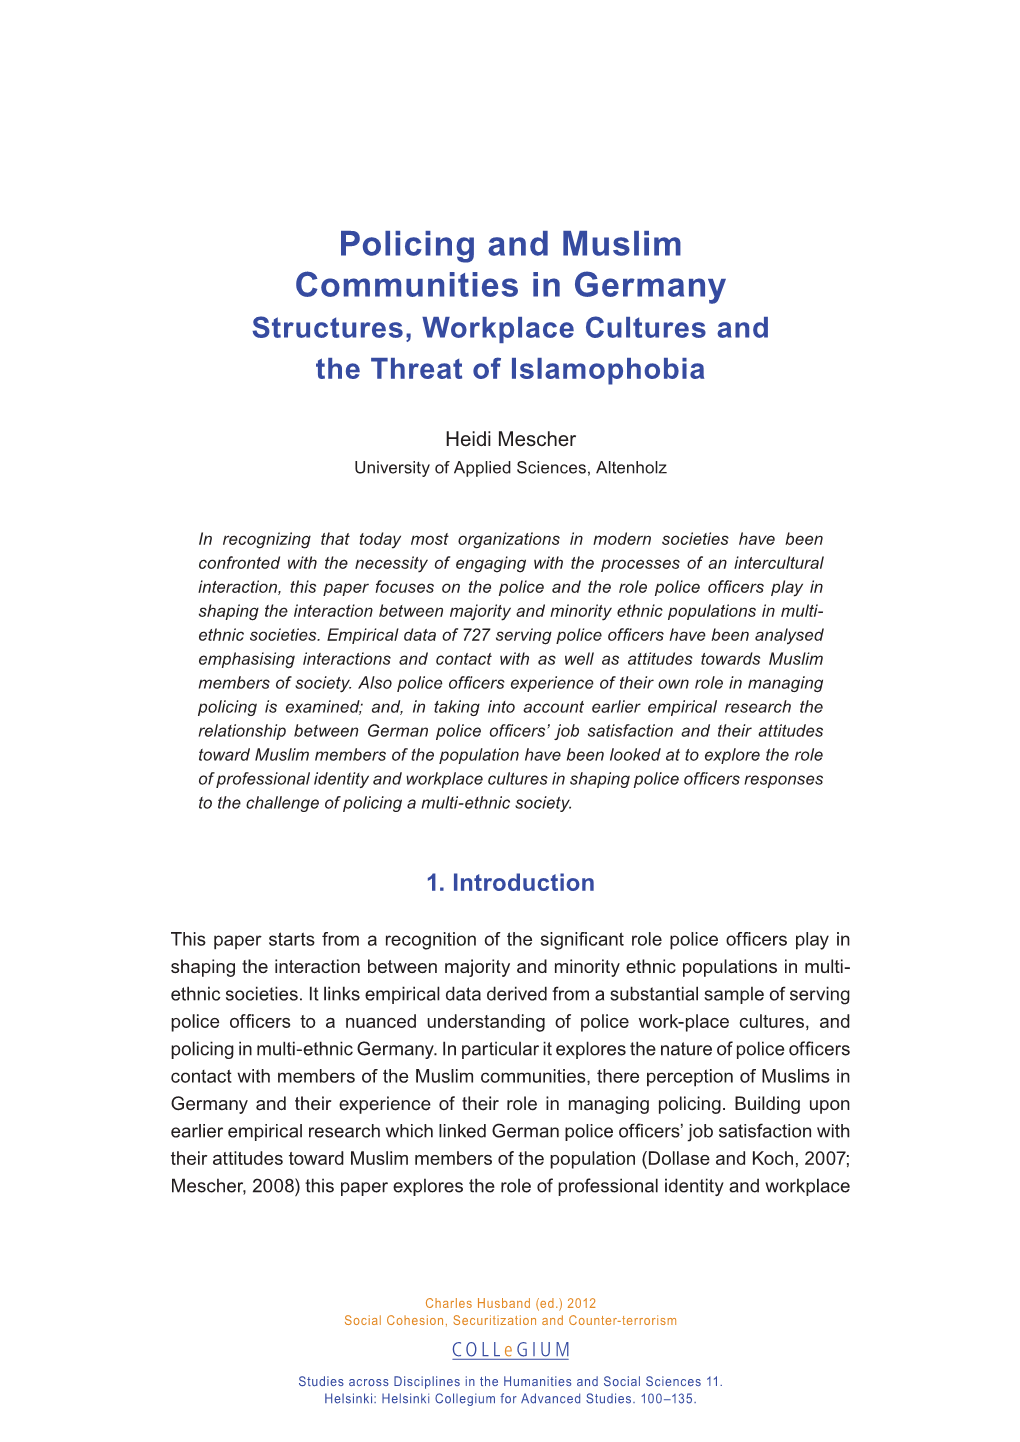 Policing and Muslim Communities in Germany Structures, Workplace Cultures and the Threat of Islamophobia